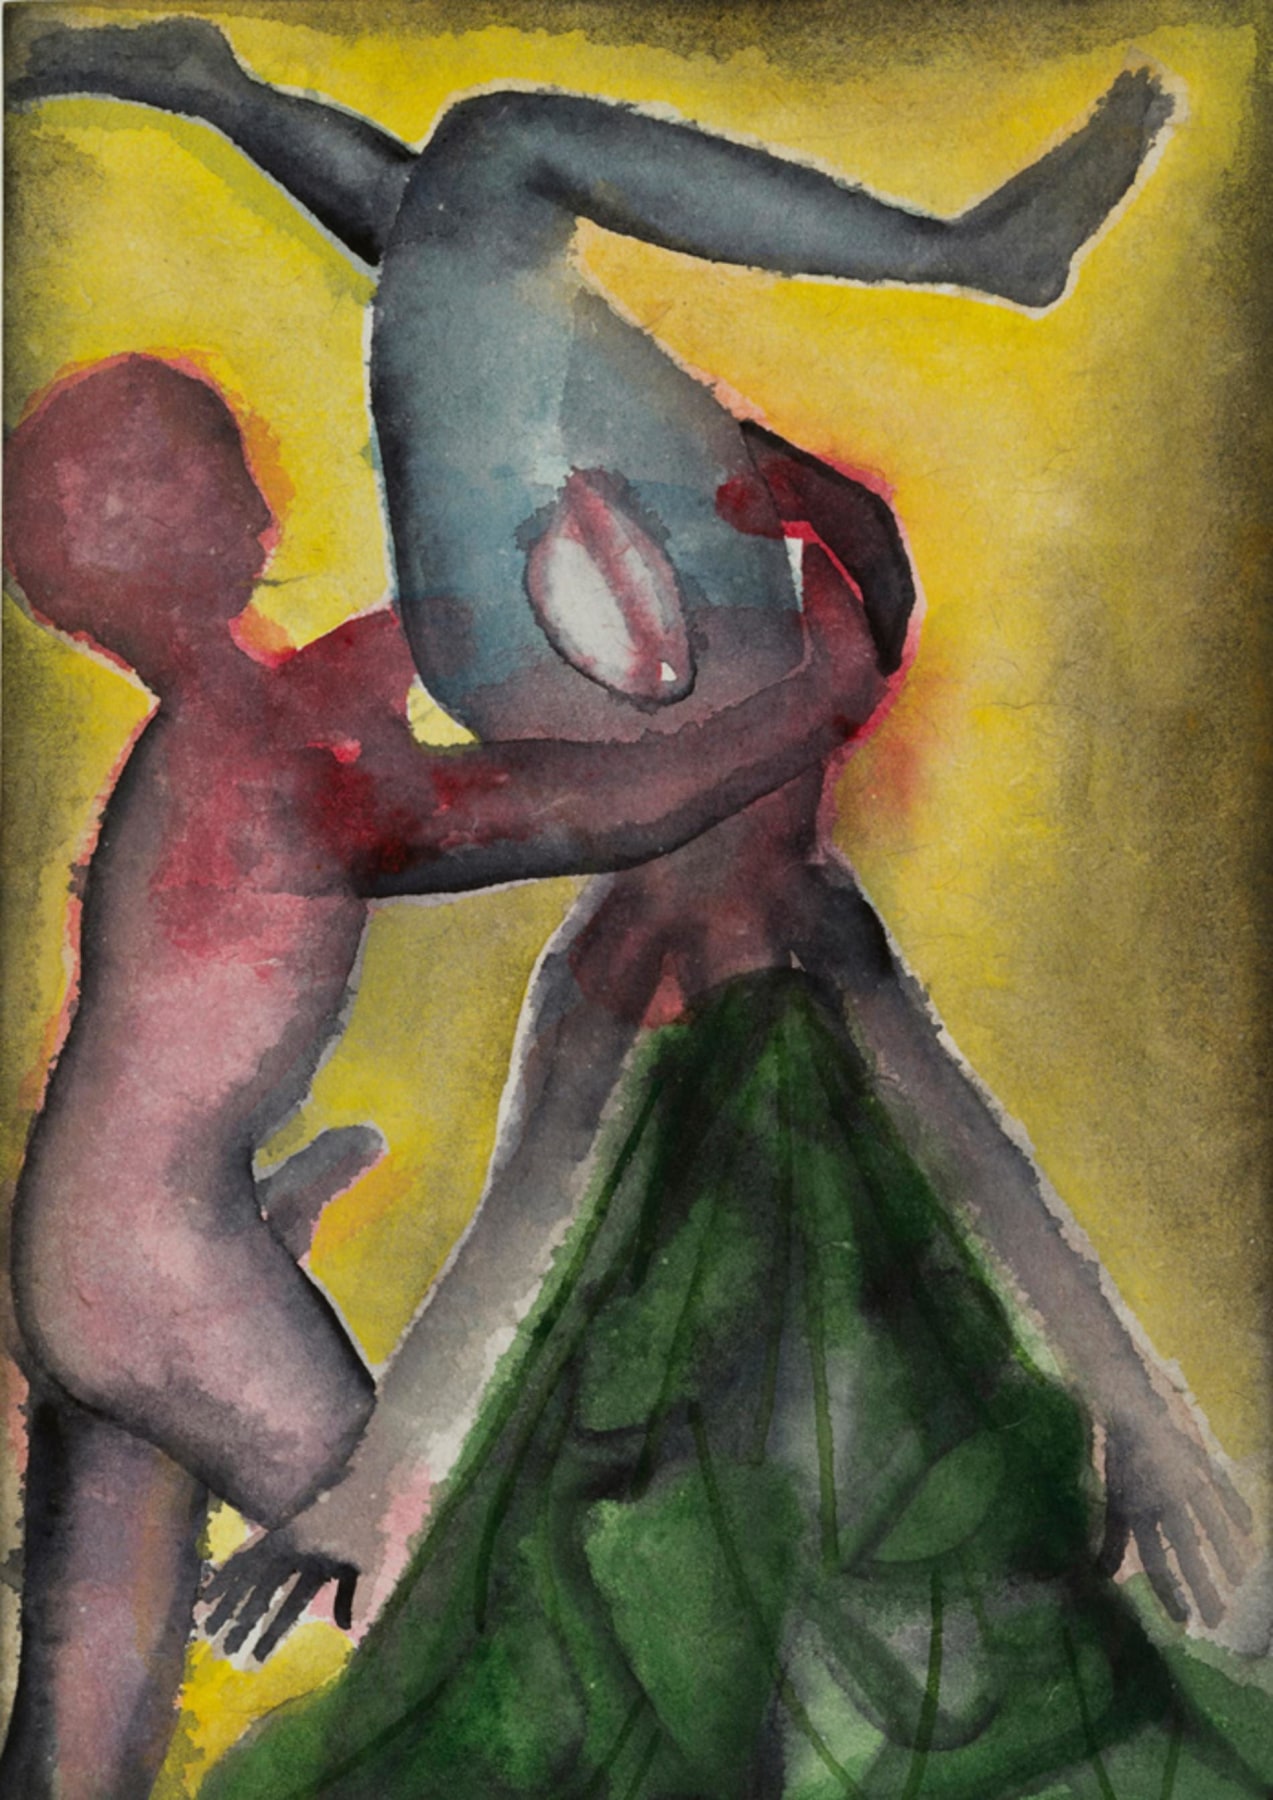 Image of FRANCESCO CLEMENTE's&nbsp;A Story Well Told (18, sunset), 2013